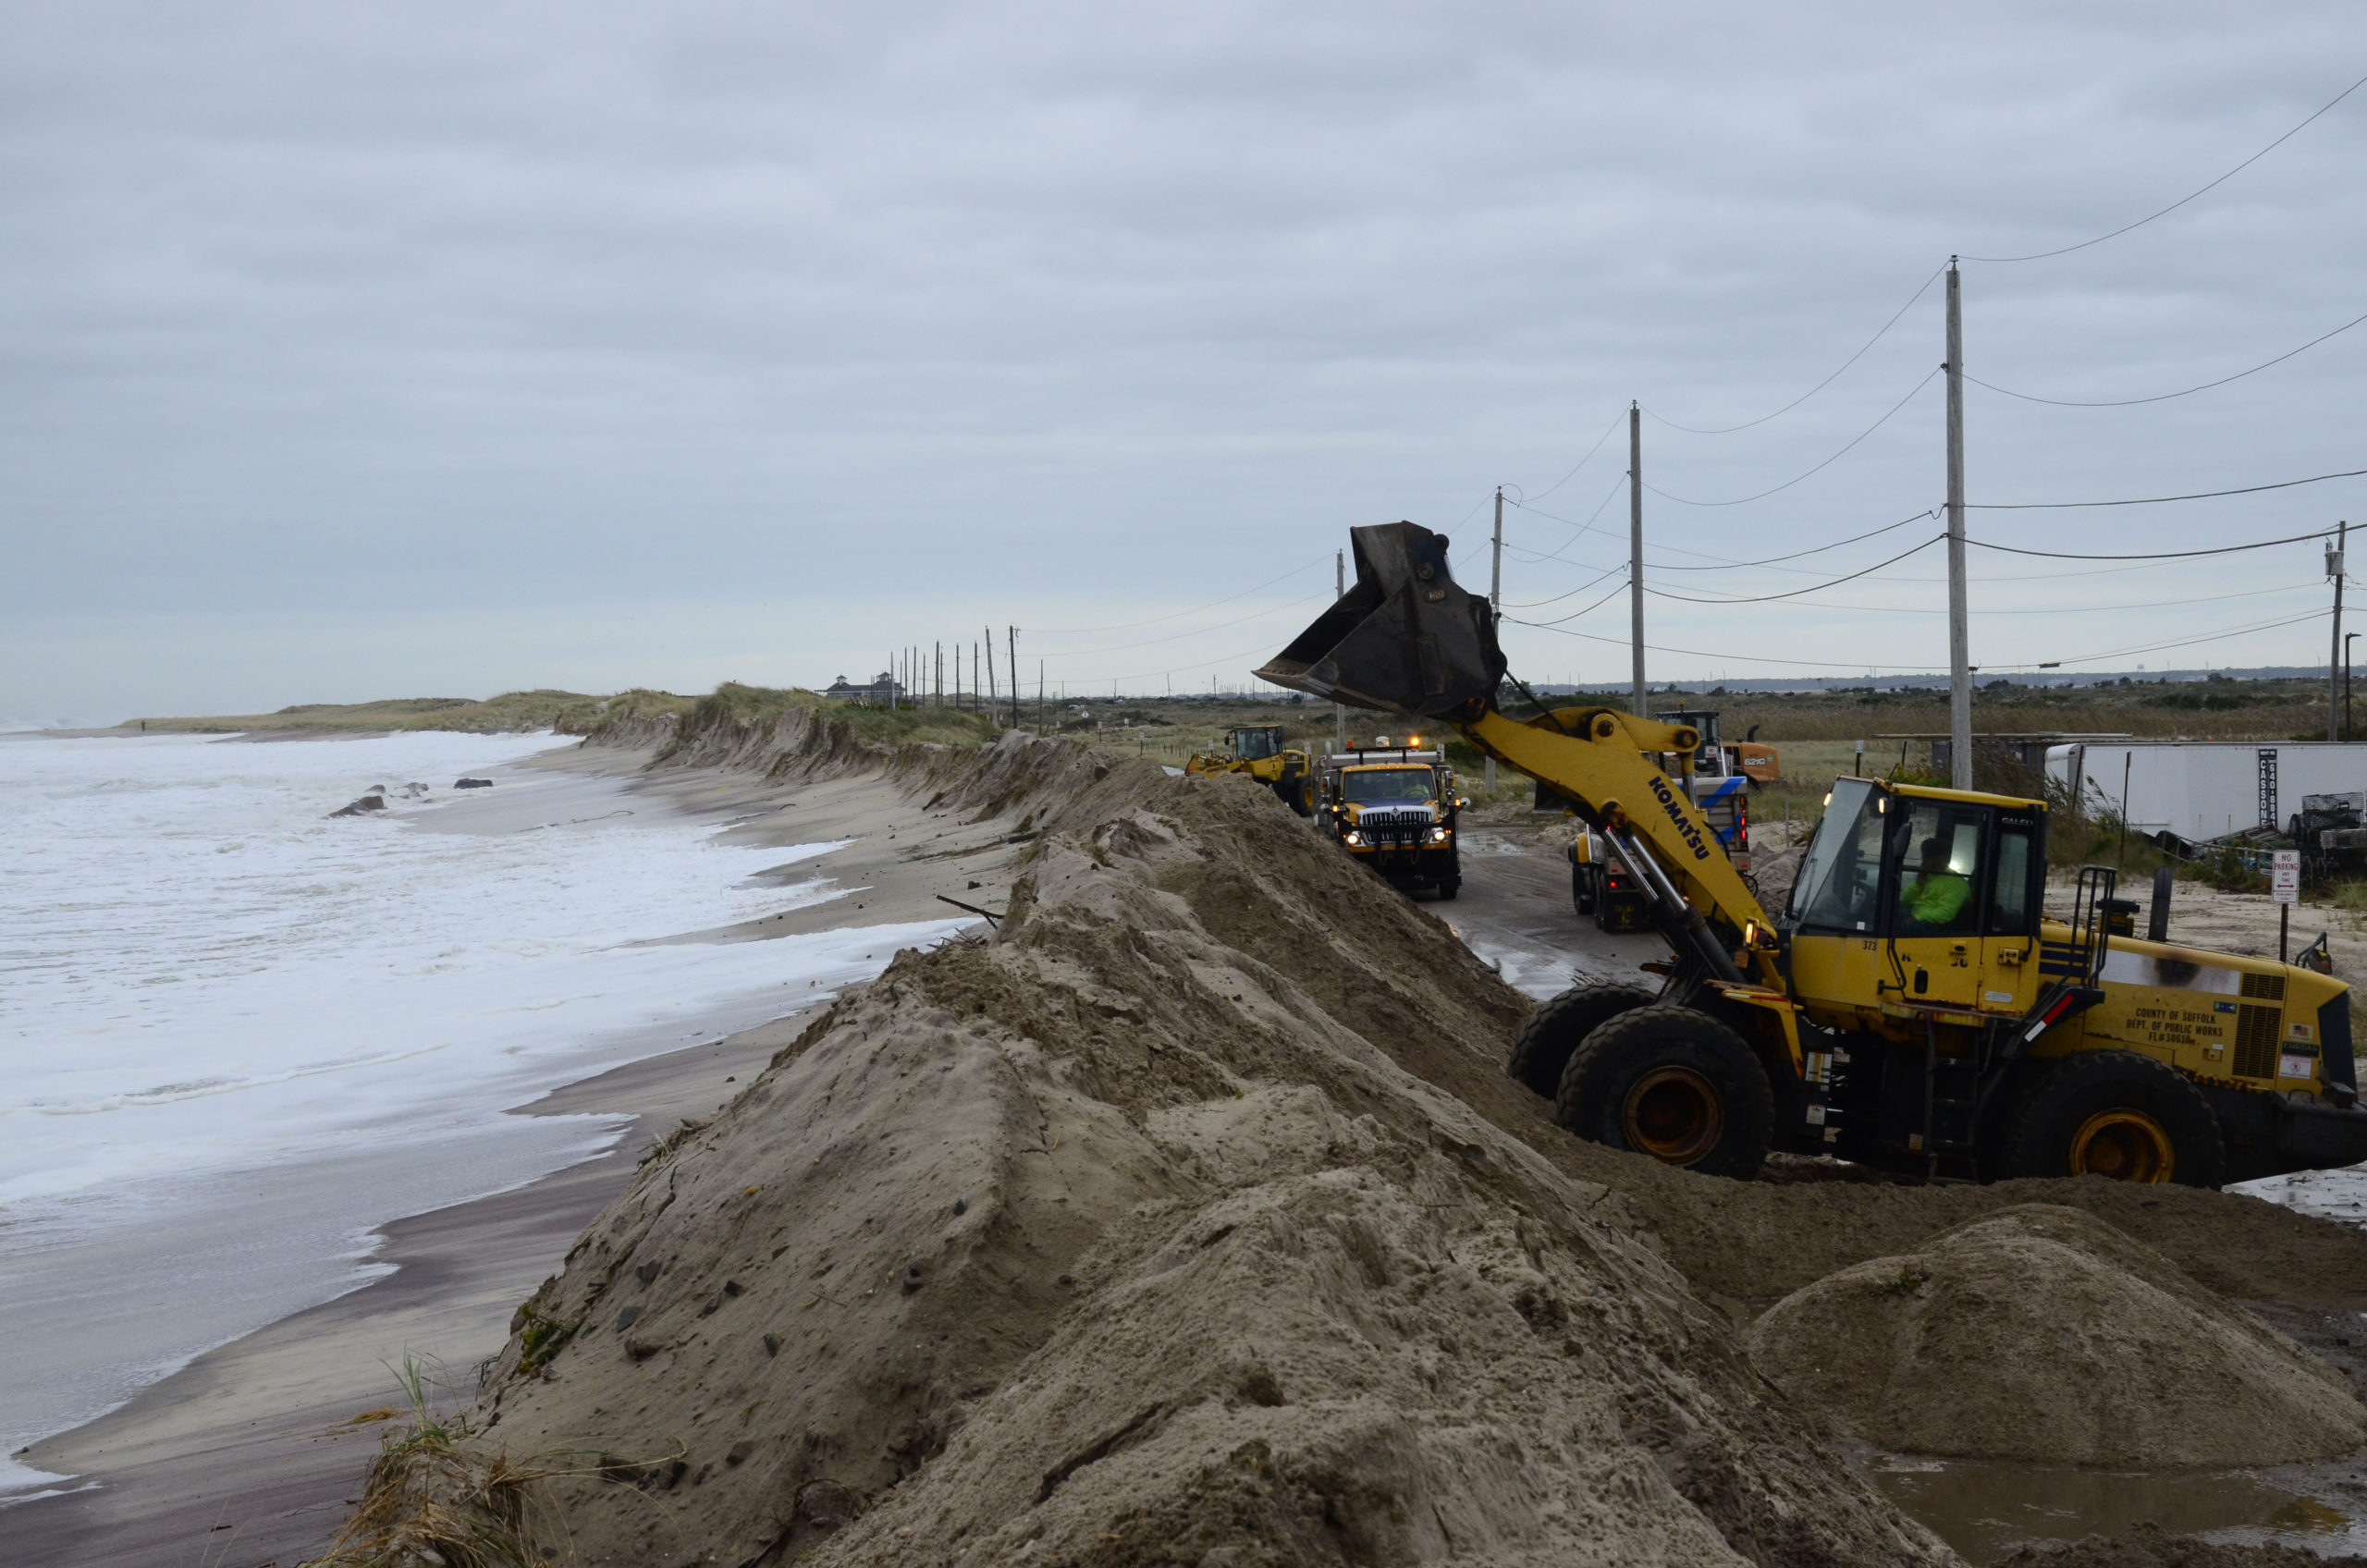 Quick Action Closes Dune Breach 
October 17 -- Big surf and strong winds from a nor’easter churning in the Atlantic Ocean caused a section of Dune Road near the Shinnecock Commercial Fishing Docks to experience washovers on Thursday night, October 10, prompting local, county and state agencies to pounce into action to bolster the dunes. The washovers were the result of a nearly 100-yard section of dune eroding away with the surf and tides, which were higher than normal during the storm. Last Thursday, Southampton Town Supervisor Jay Schneiderman declared a state of emergency due to severe erosion and the potential of coastal flooding along the eastern end of Dune Road, in anticipation of the nor’easter. The declaration allowed the town to accelerate any required coordination with the State Department of Environmental Conservation to move sand and rebuild the dune. It also allowed the town to request assistance from the Suffolk County Department of Public Works to bring in heavy equipment to reconstruct the dune.